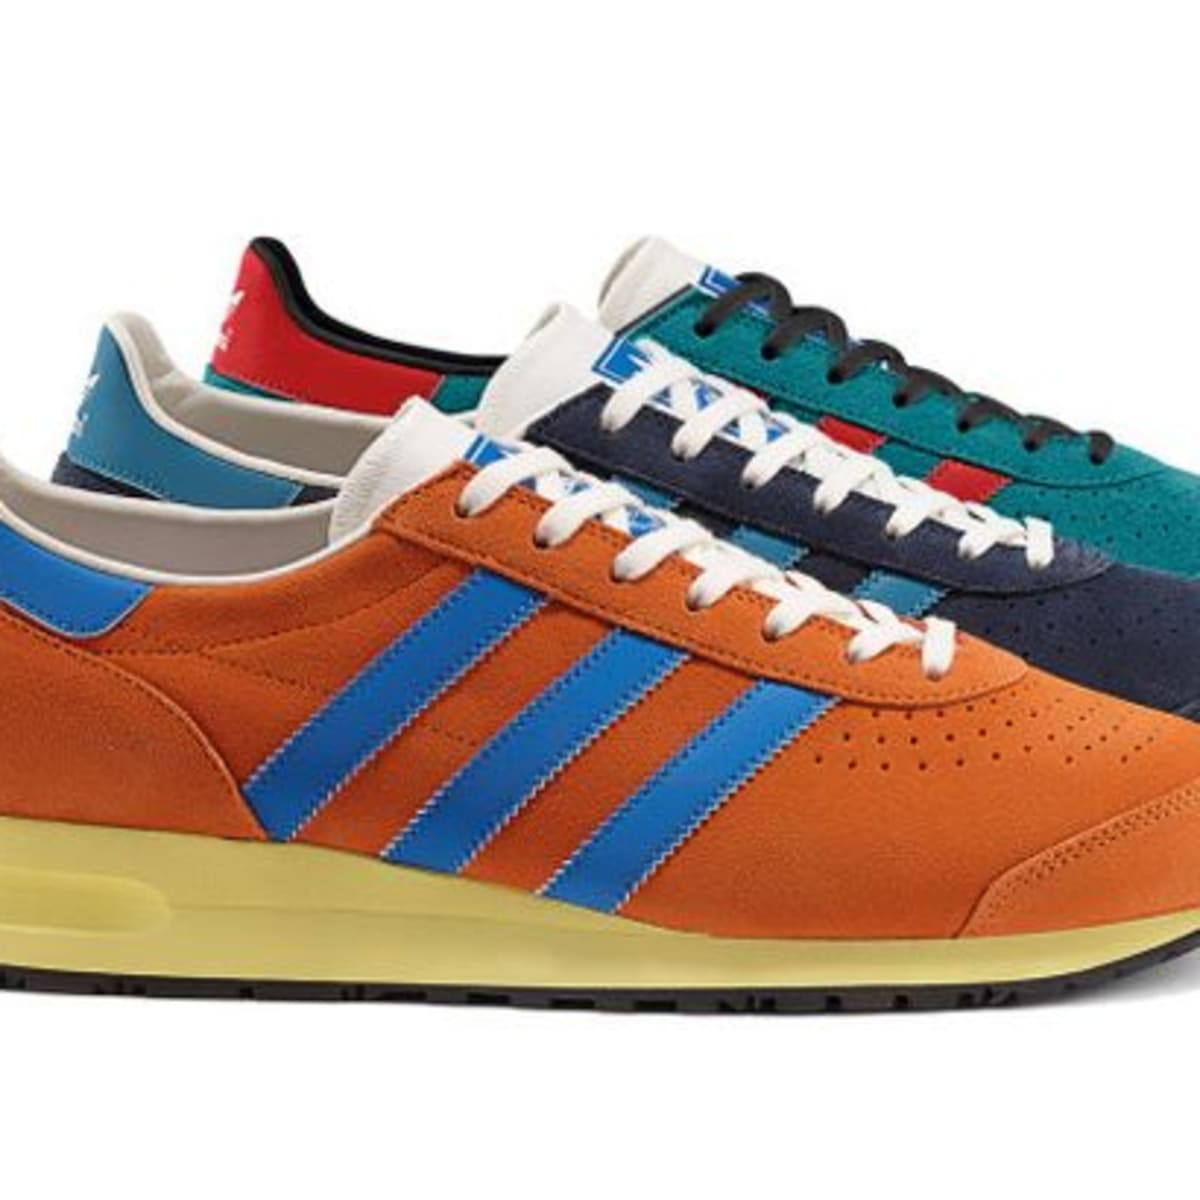 simplemente piel Brillar EDM Style: Adidas Releases Marathon 85 Retro Running Shoe For The First  Time - Magnetic Magazine